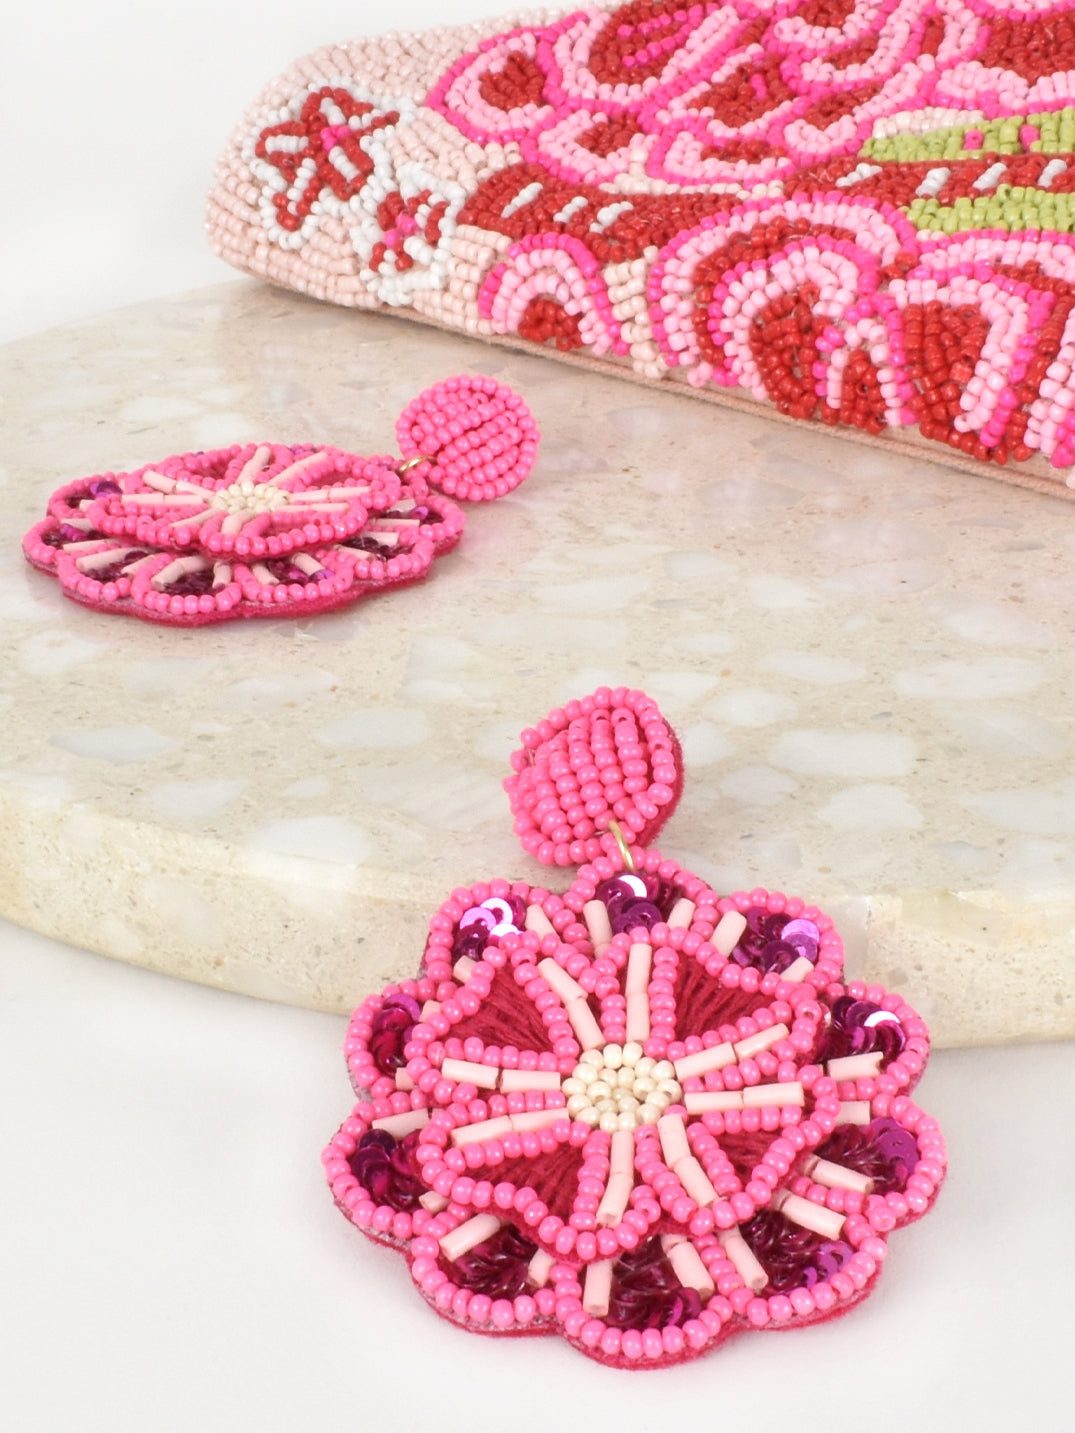 Pink Flower Beaded Earrings with stud back closure. Make a statement with these gorgeous earrings.